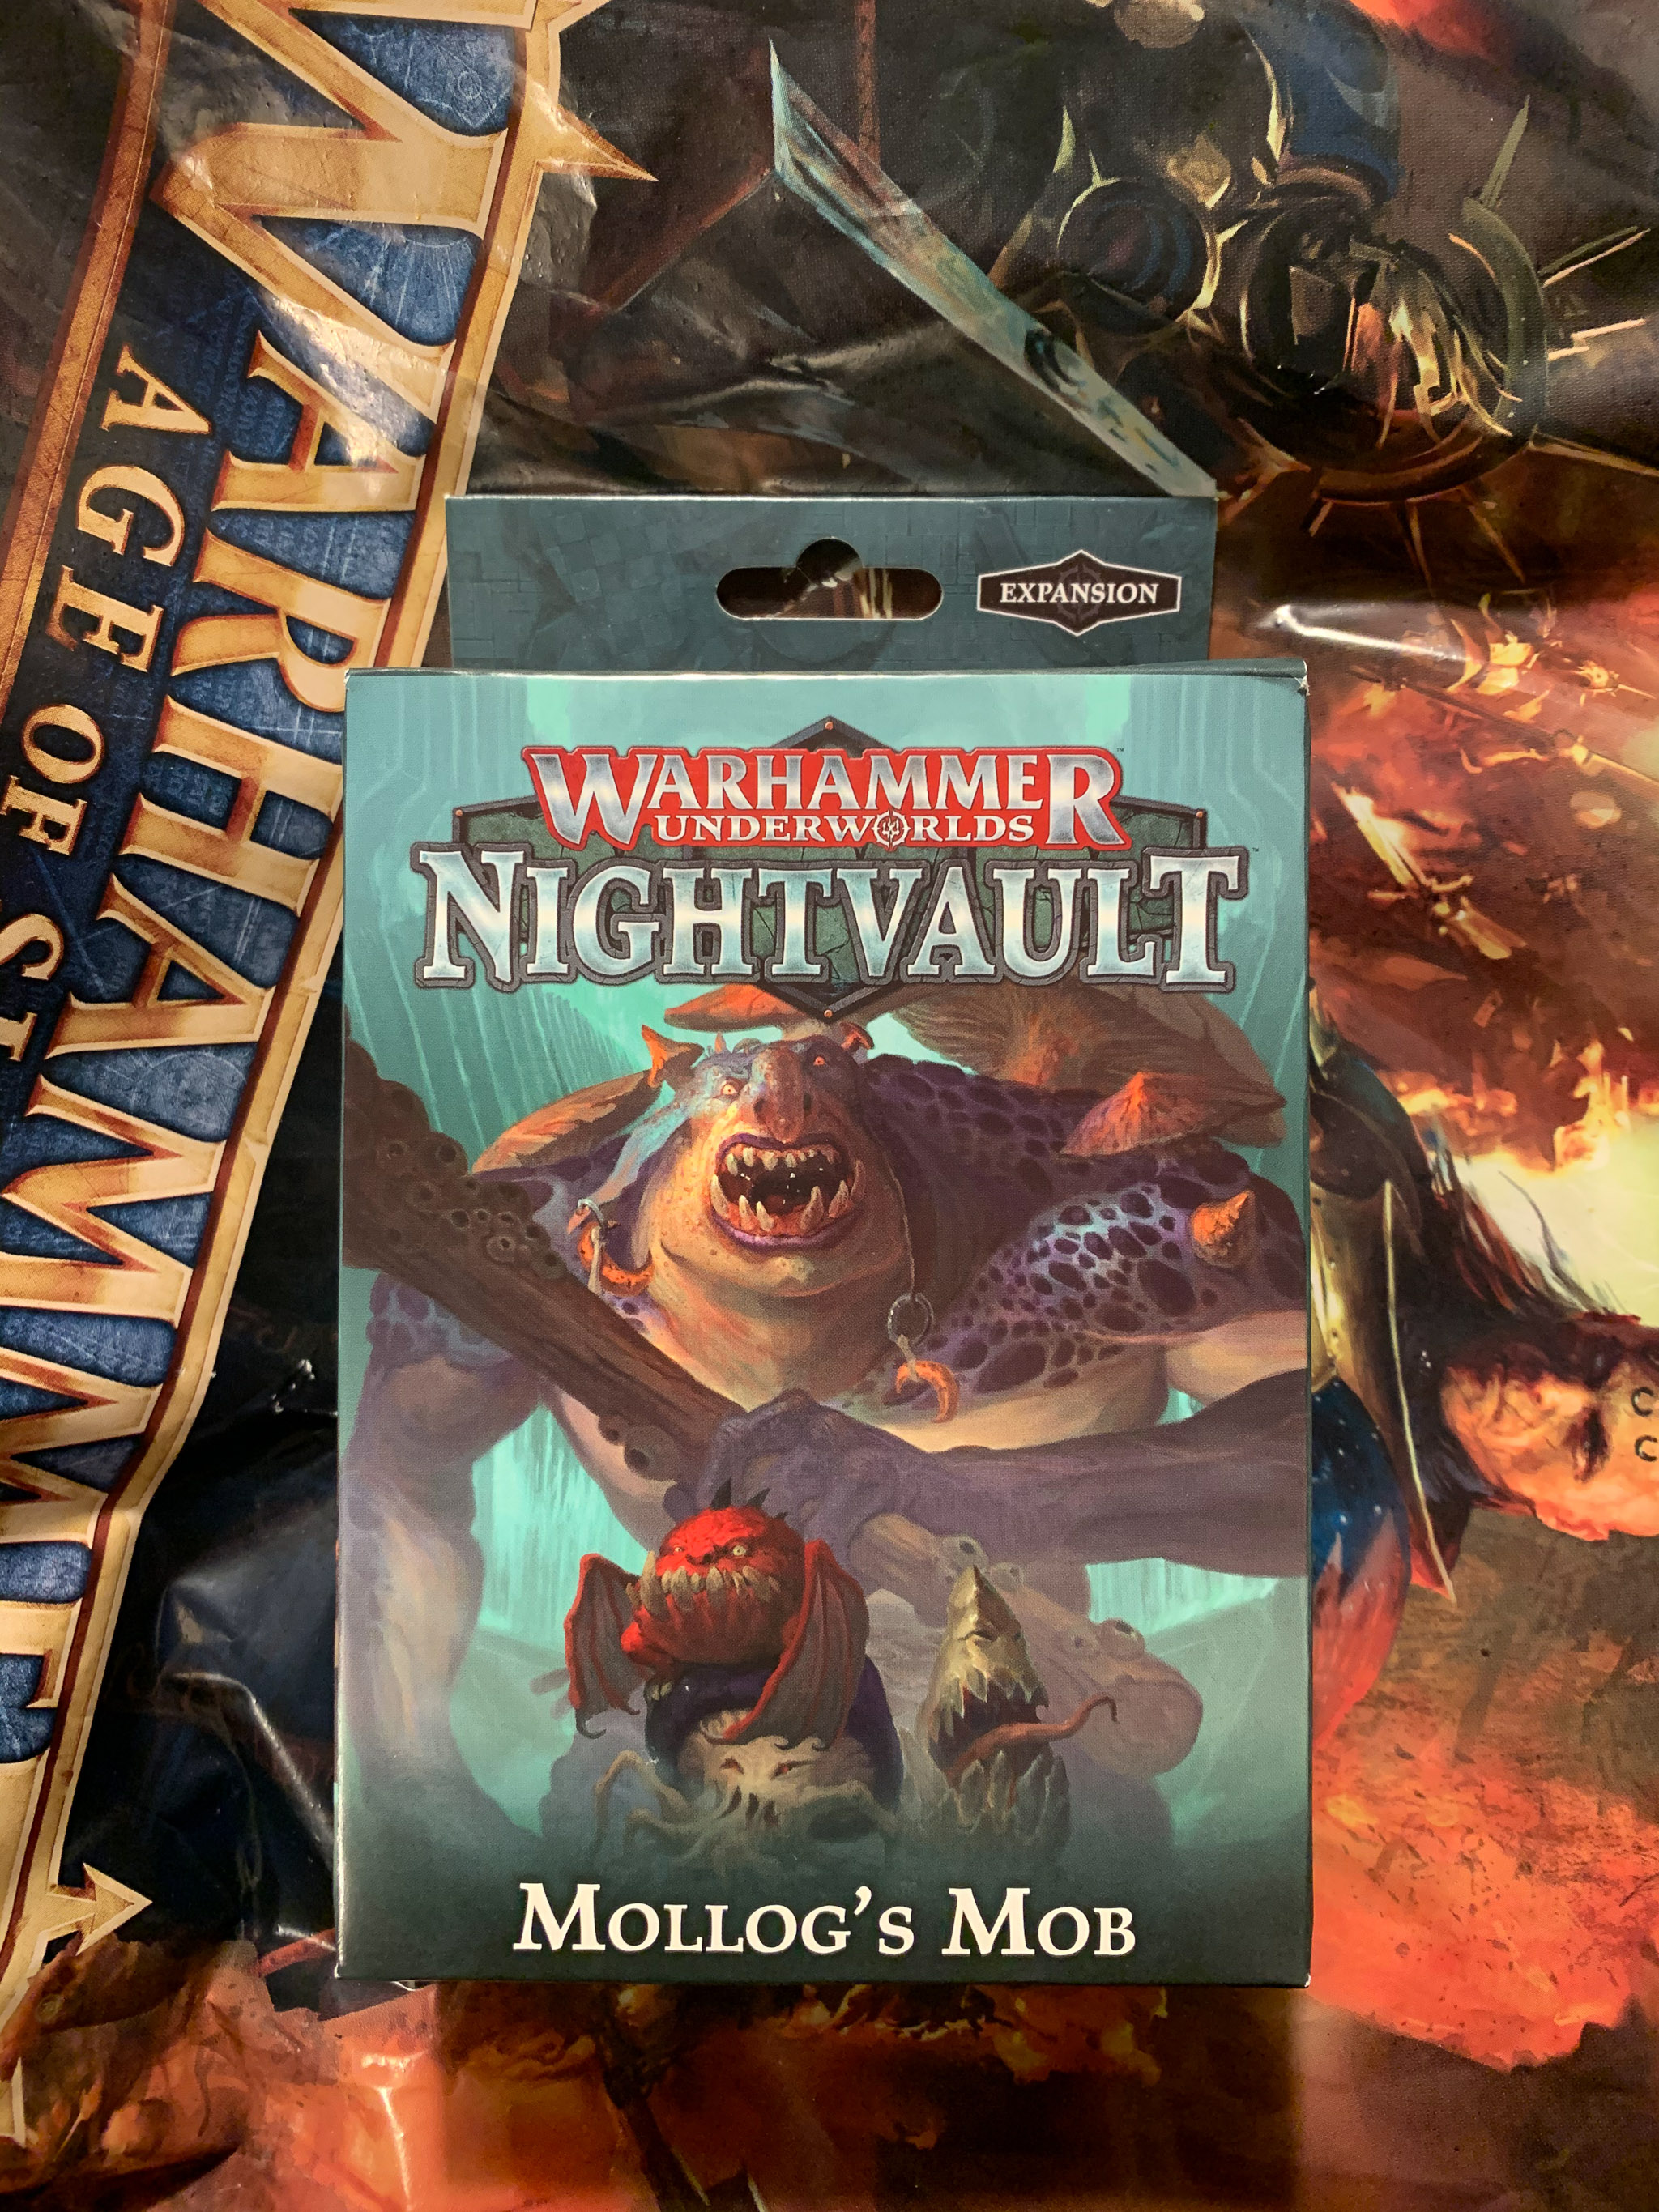 Mollog's Mob
This is what I was picking up from the Warhammer shop. I won't pretend to understand it; I've been Warhammer-adjacent for decades without really le...